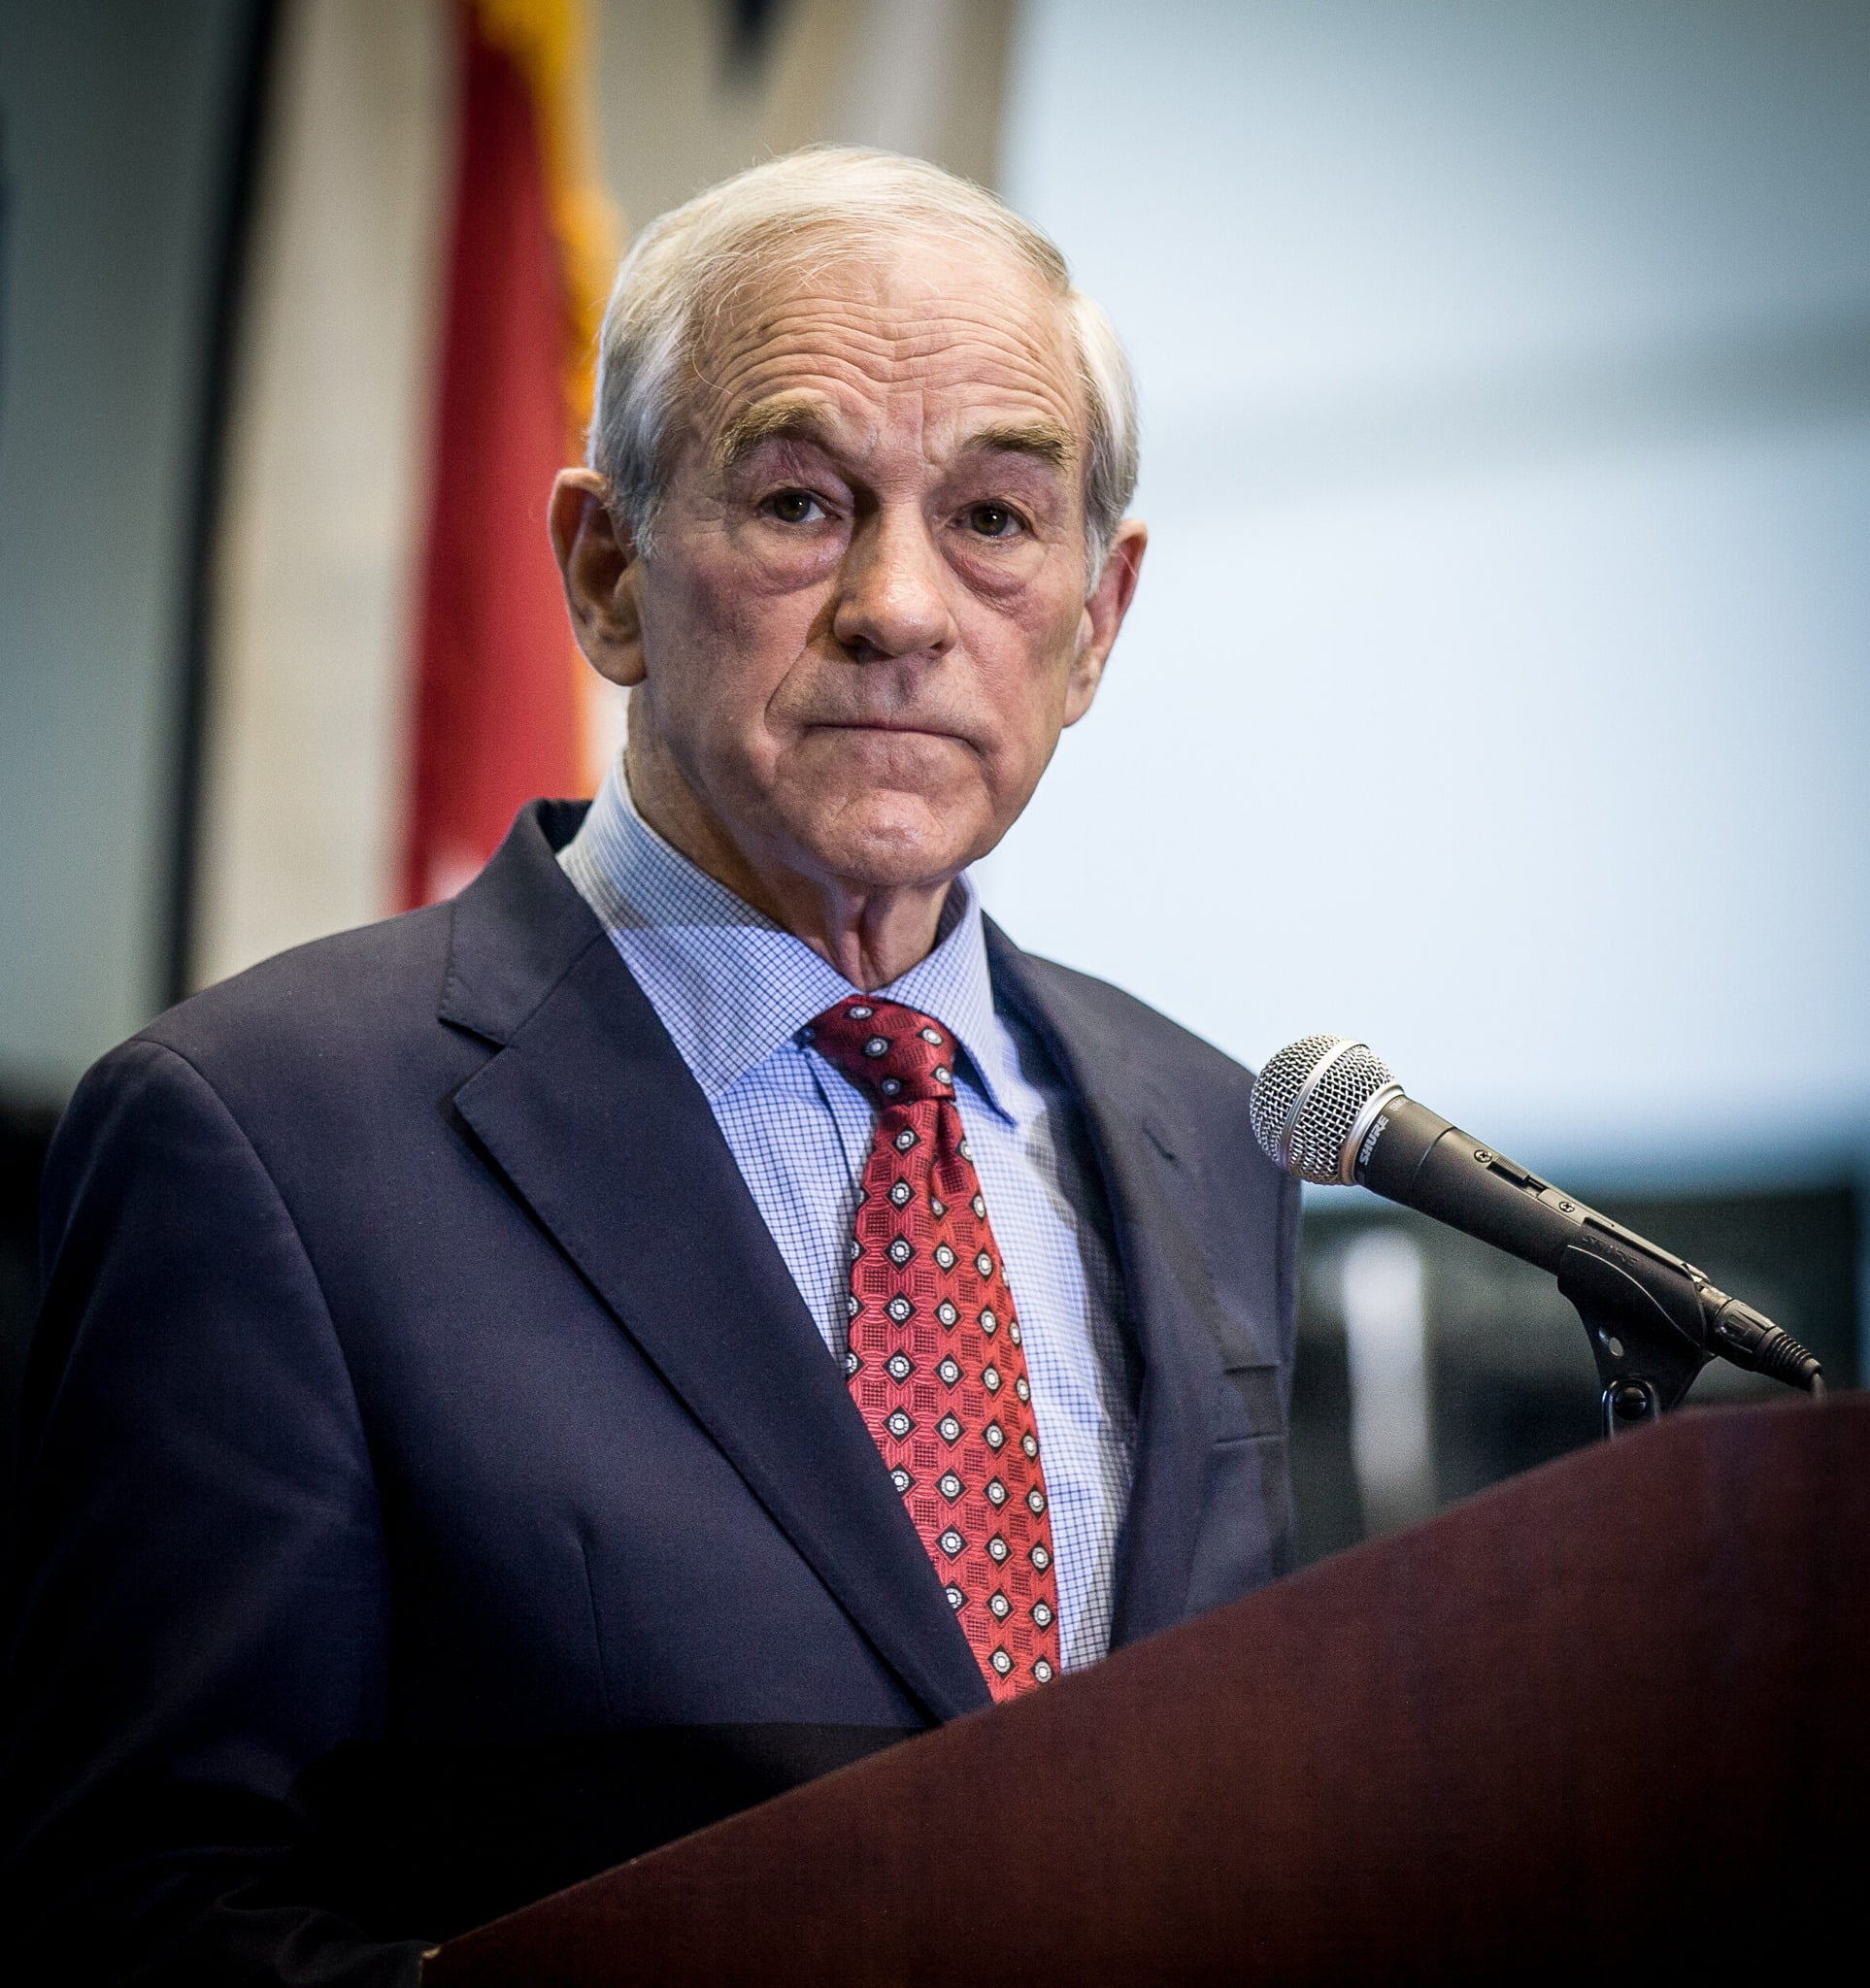 Democrats overstepped with Obamacare, allowing highly motivated Ron Paul...